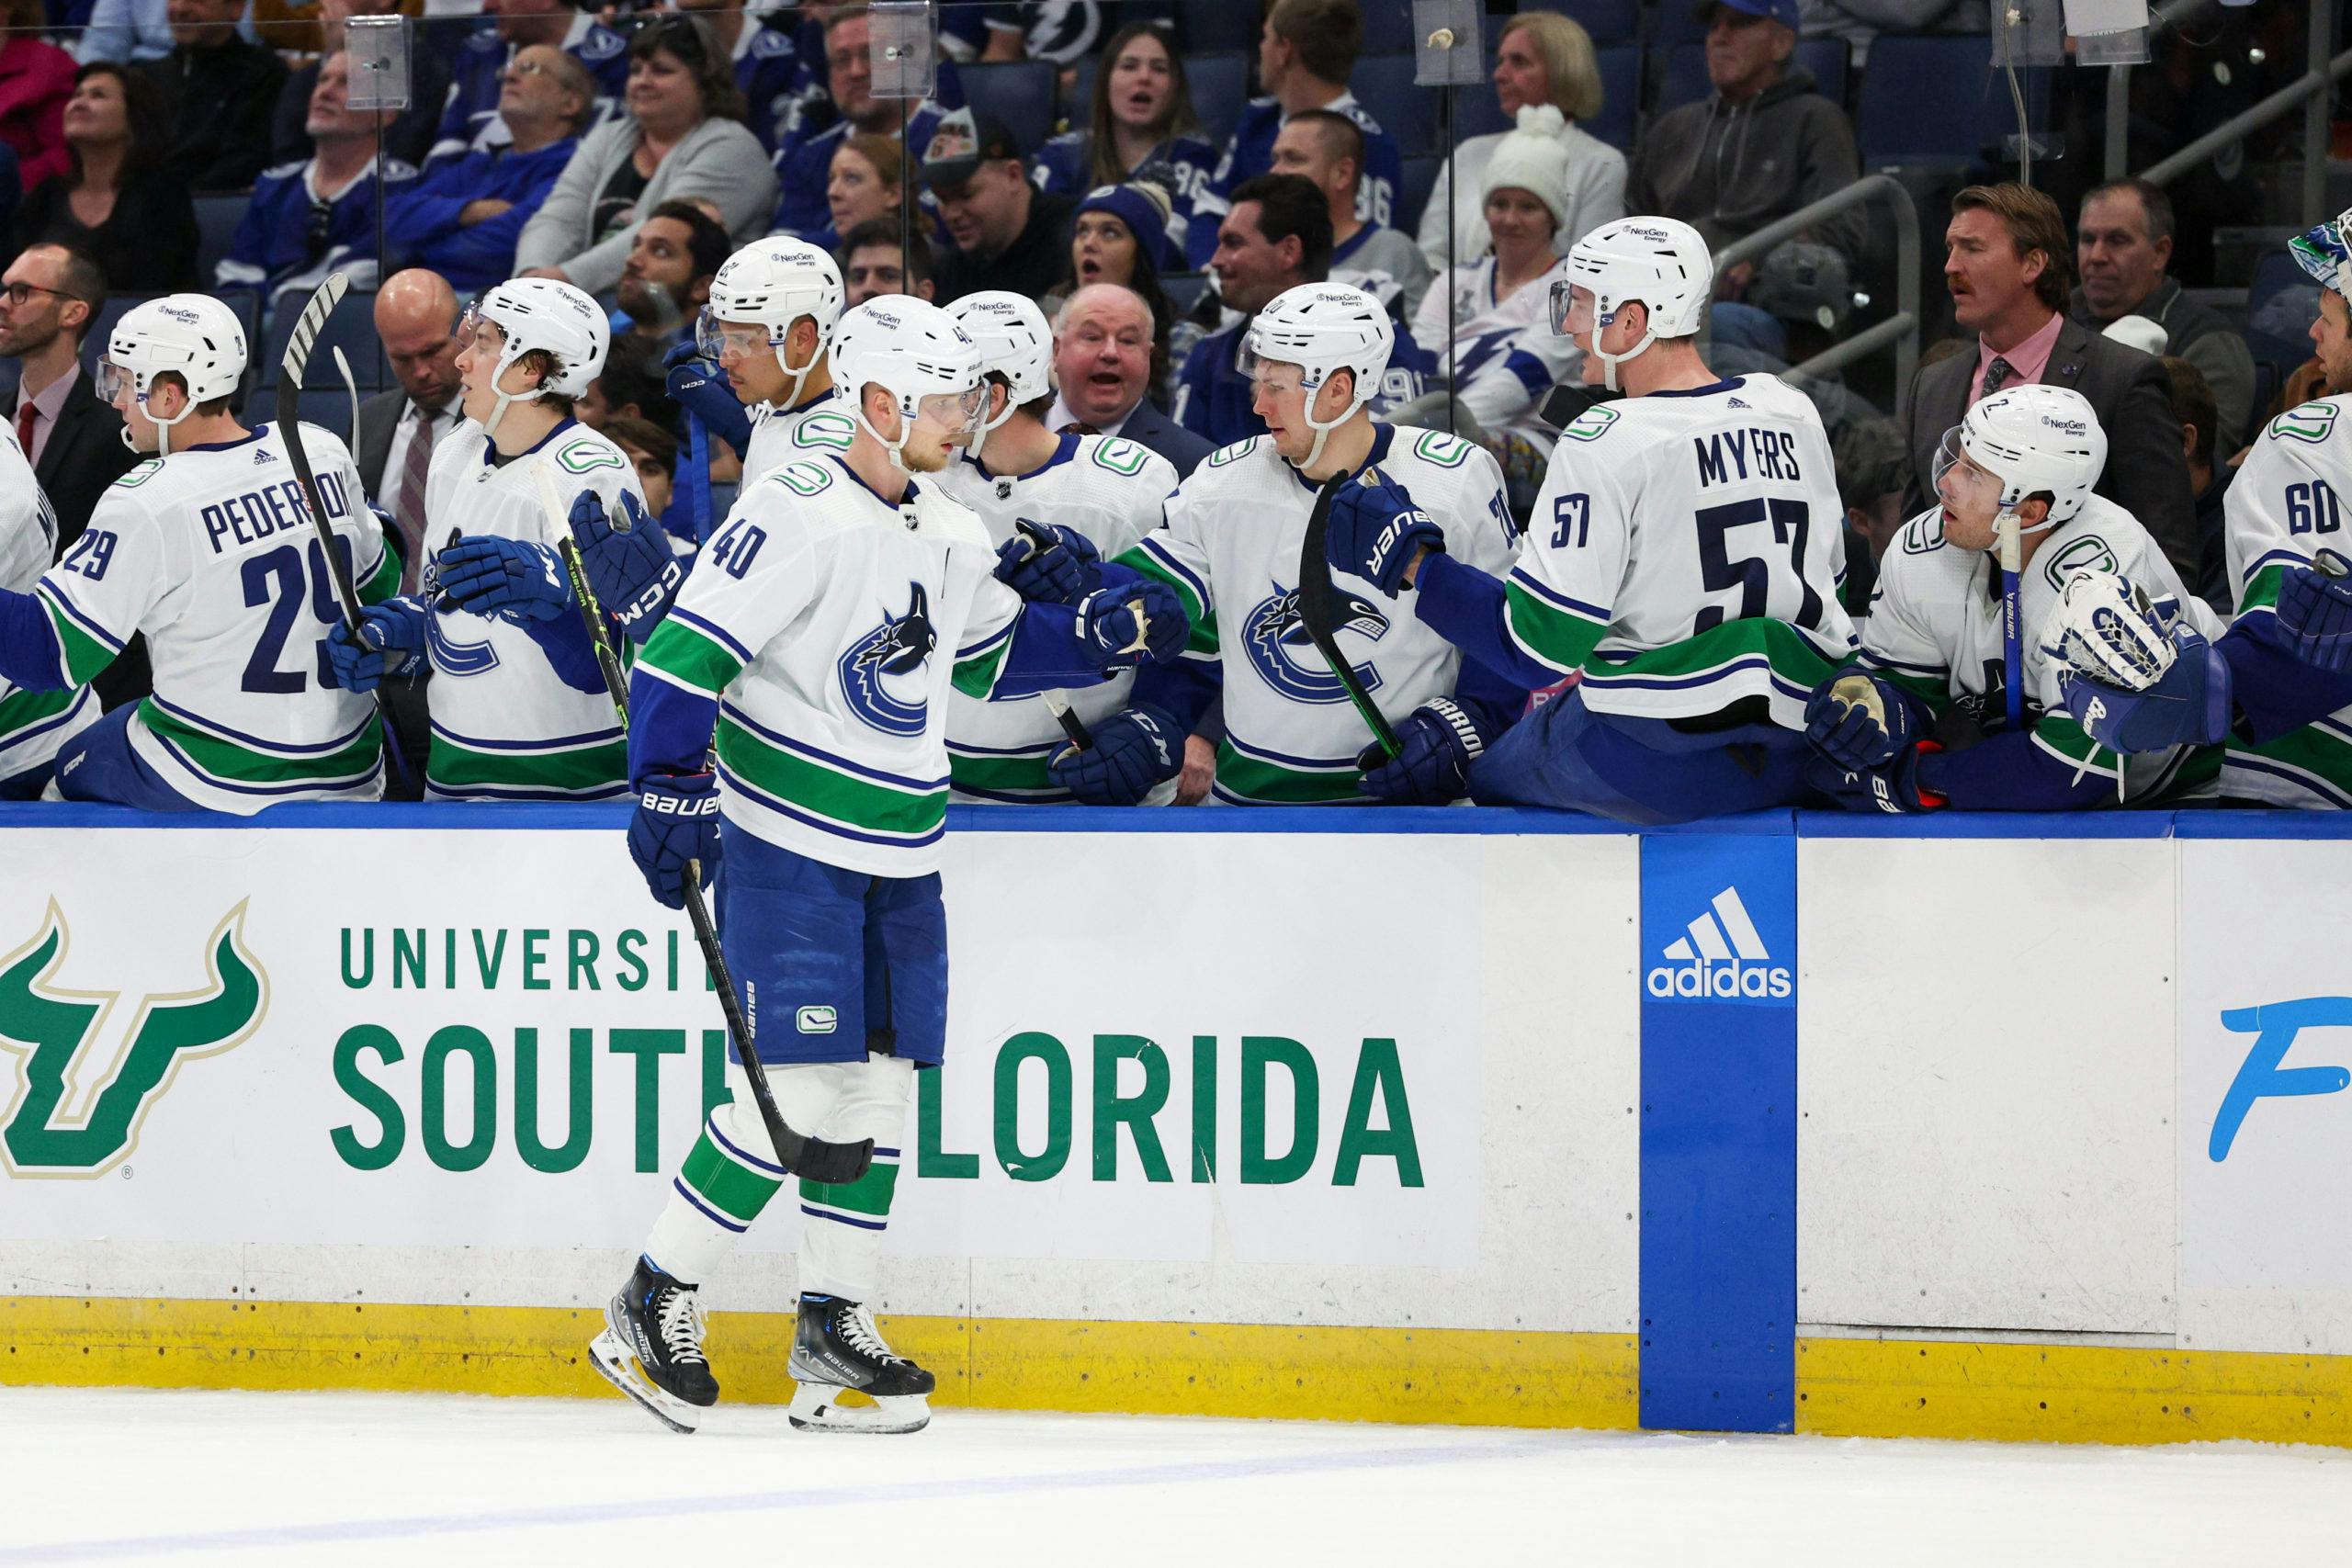 Vancouver Canucks: Elias Pettersson close to breaking multiple records